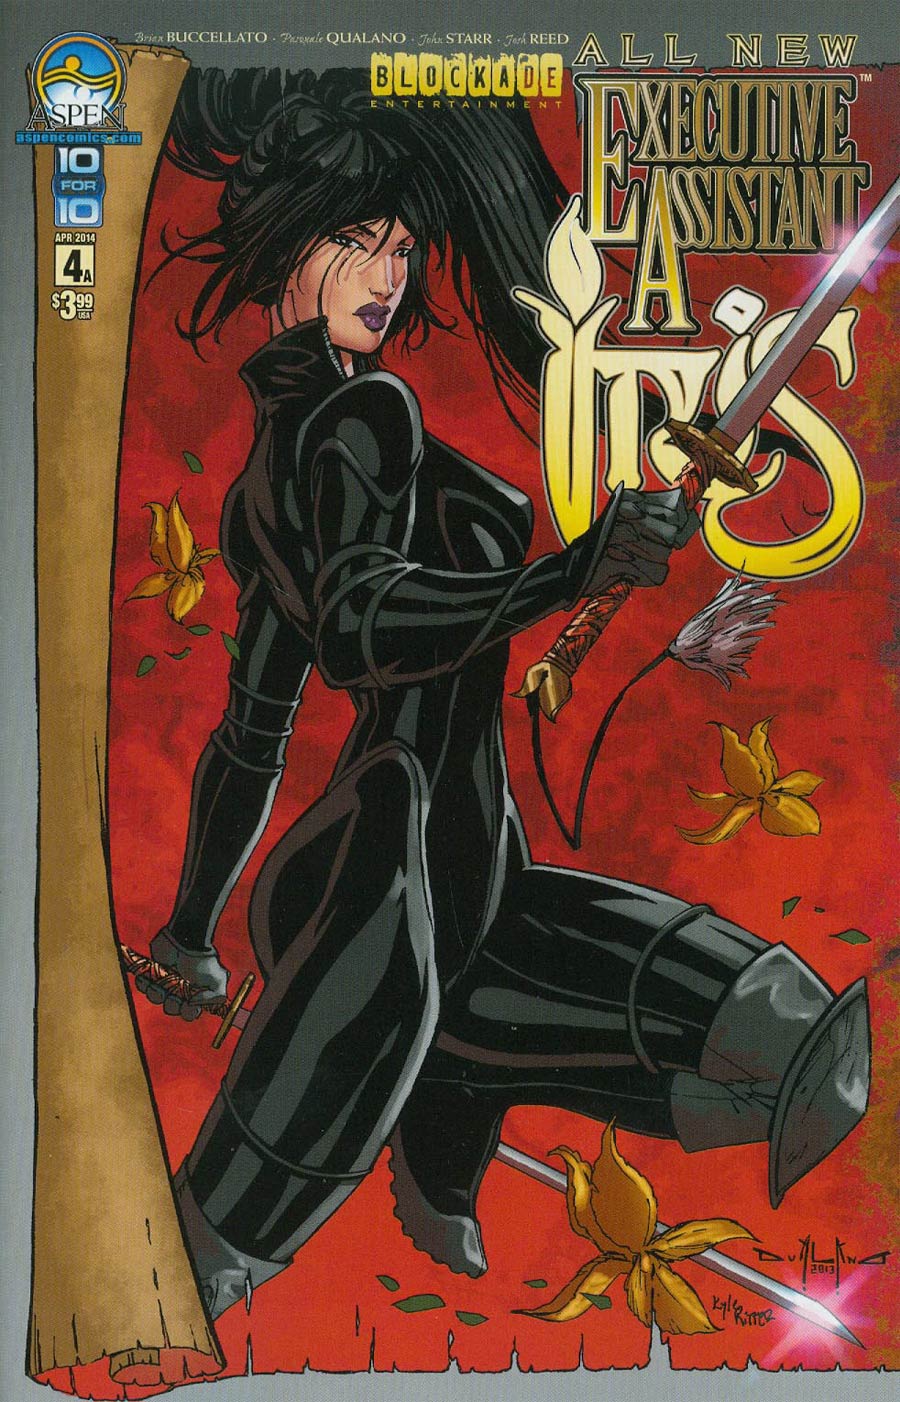 All New Executive Assistant Iris #4 Cover A